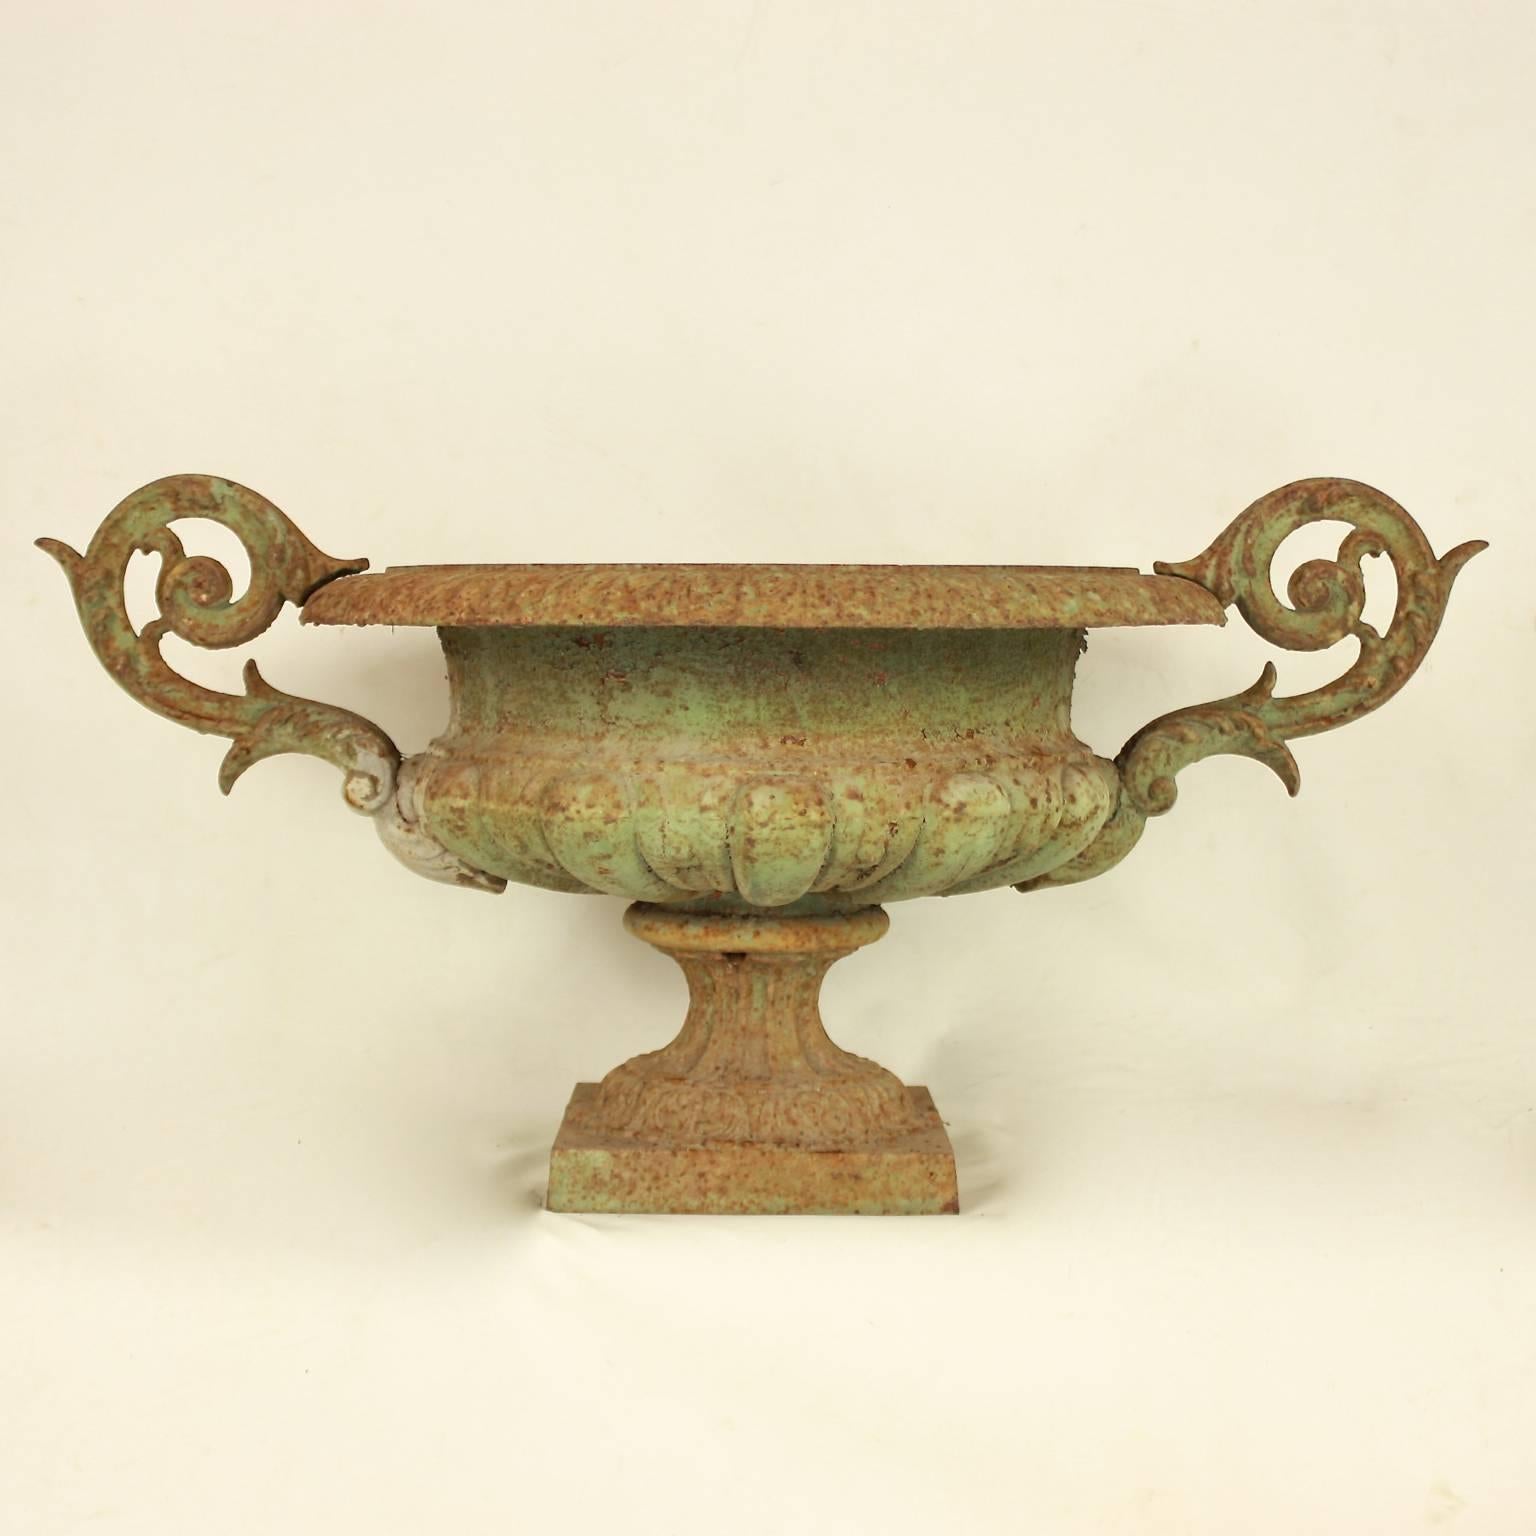 Beautiful pair of cast iron jardinieres, so-called 'Vases Chambord' on shallow fluted feet, with gadrooning at the lower body, a leave rim and scrolled foliate handles. Remains of green paint perfectly brightens up the wonderful old weathered